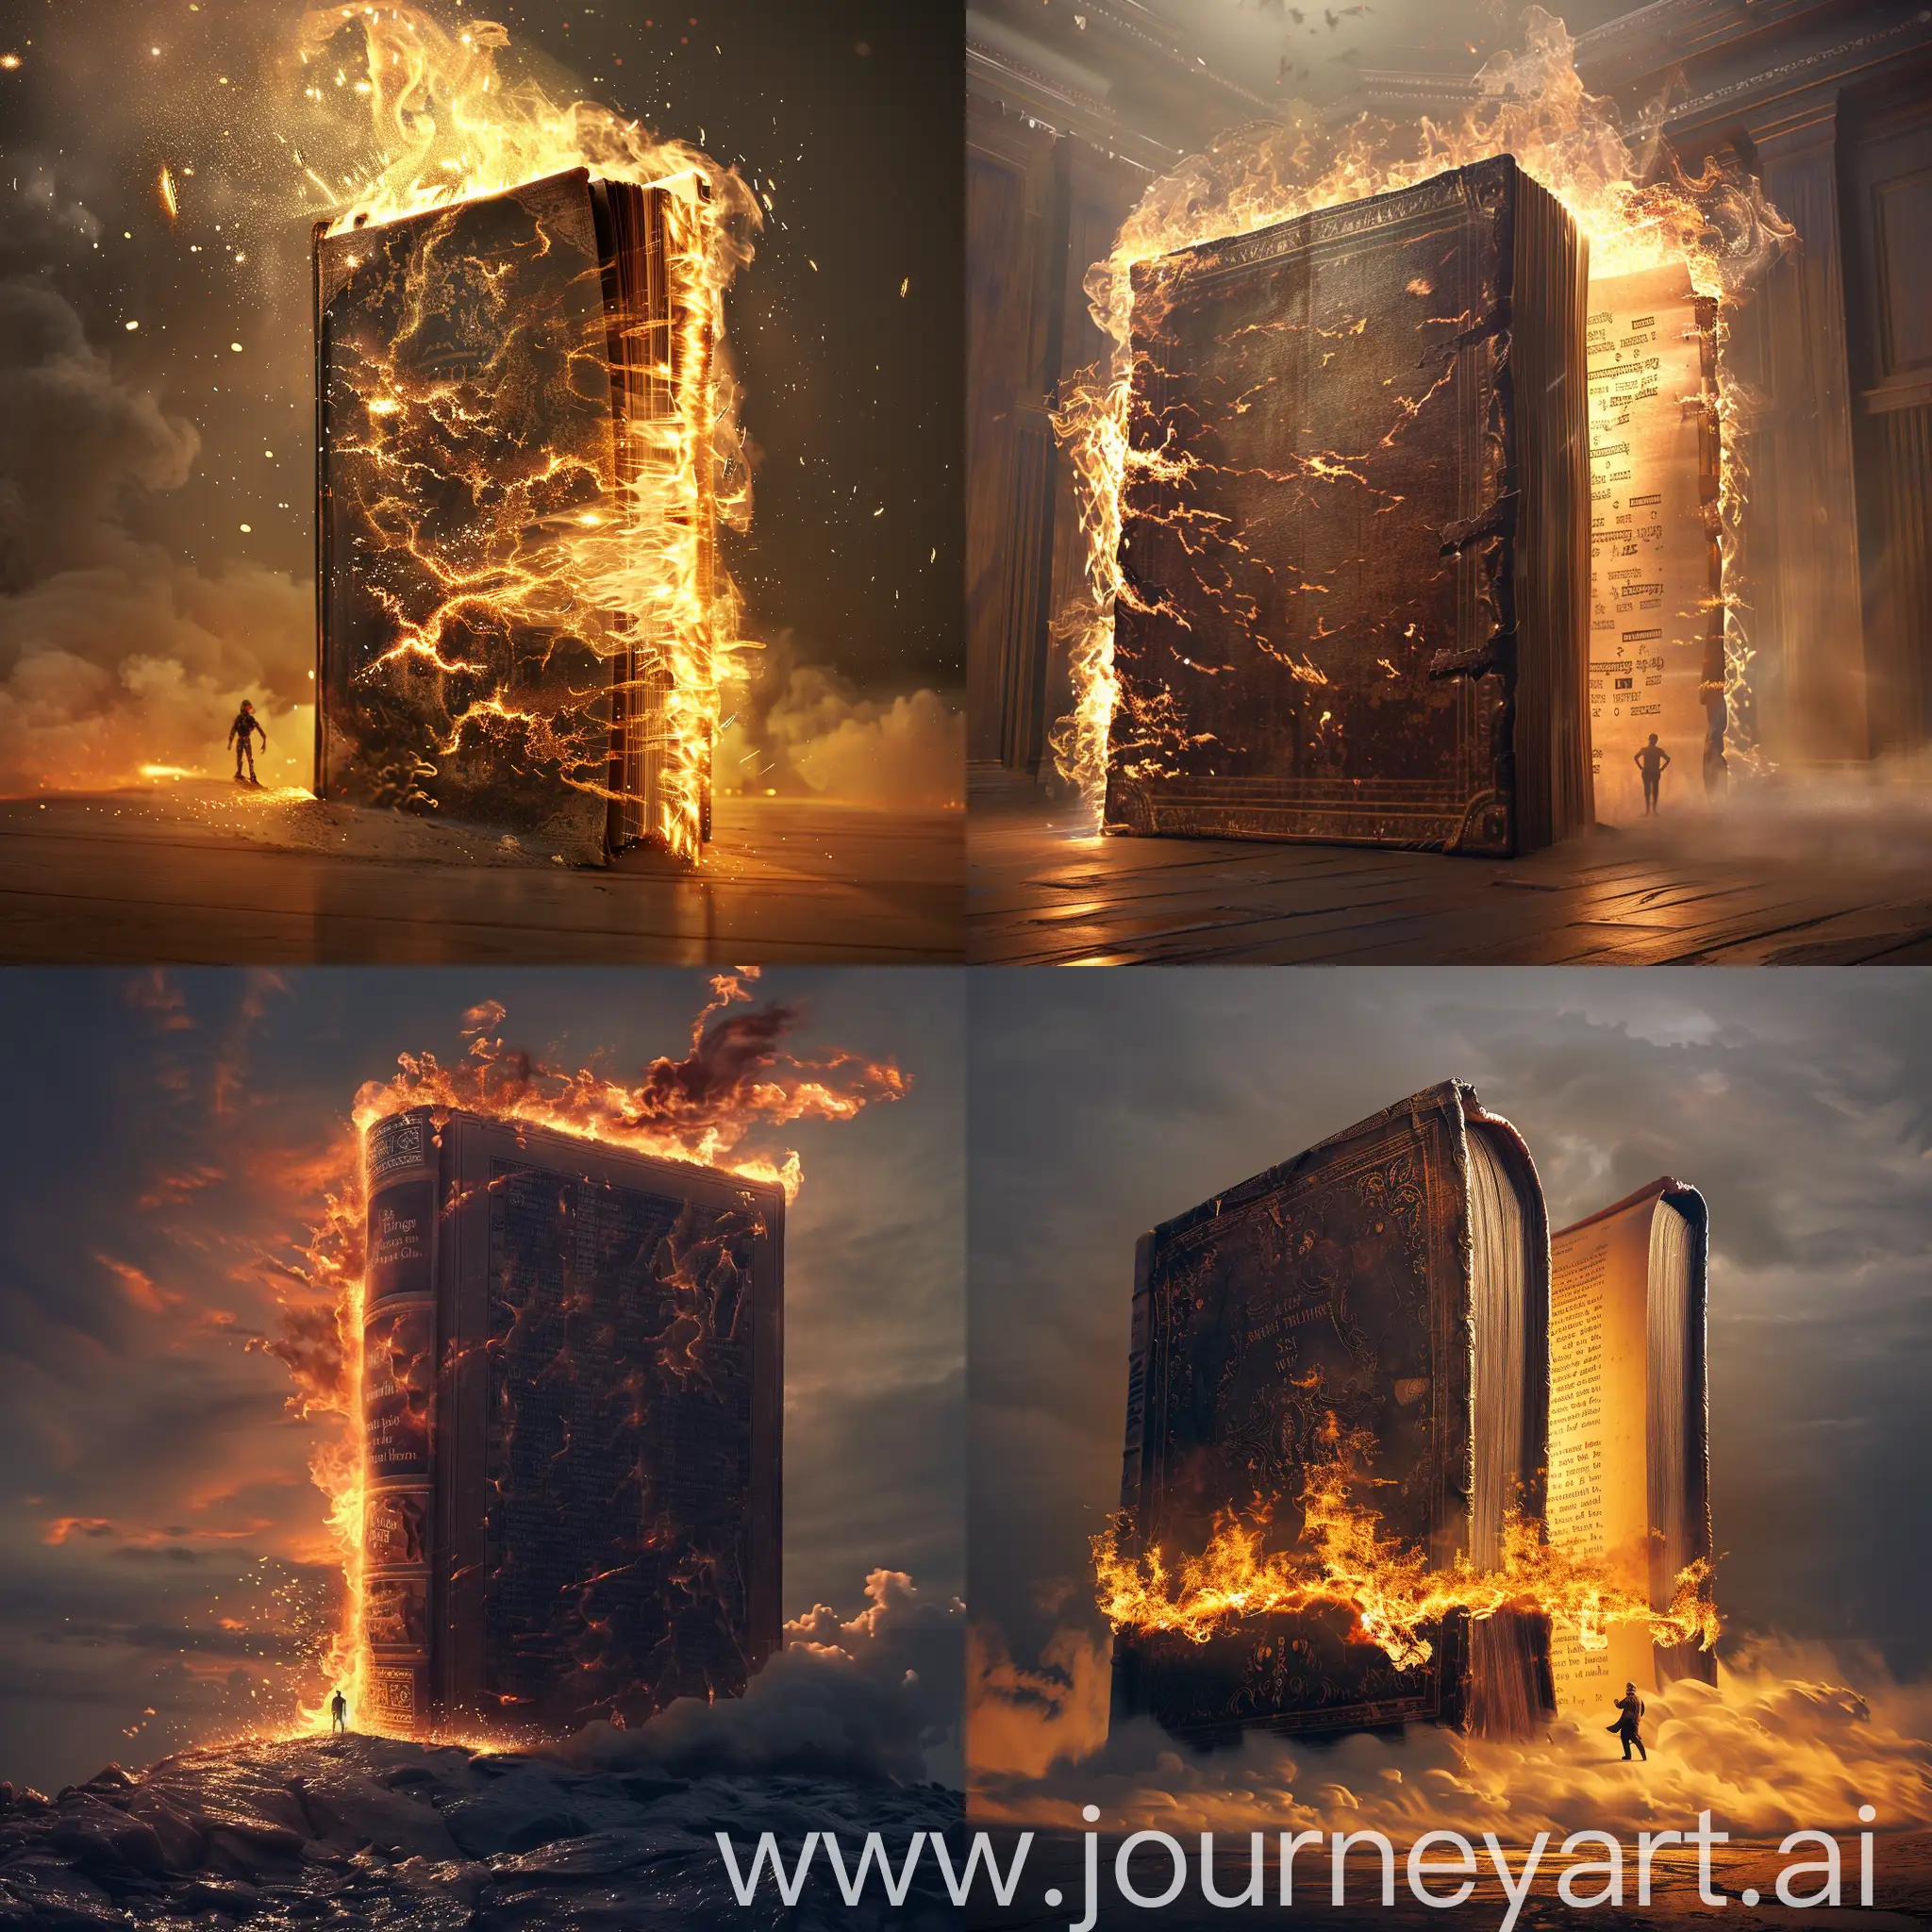 Dramatic-Scene-Small-Man-Stands-Behind-Gigantic-20Meter-High-Book-with-Fiery-Background